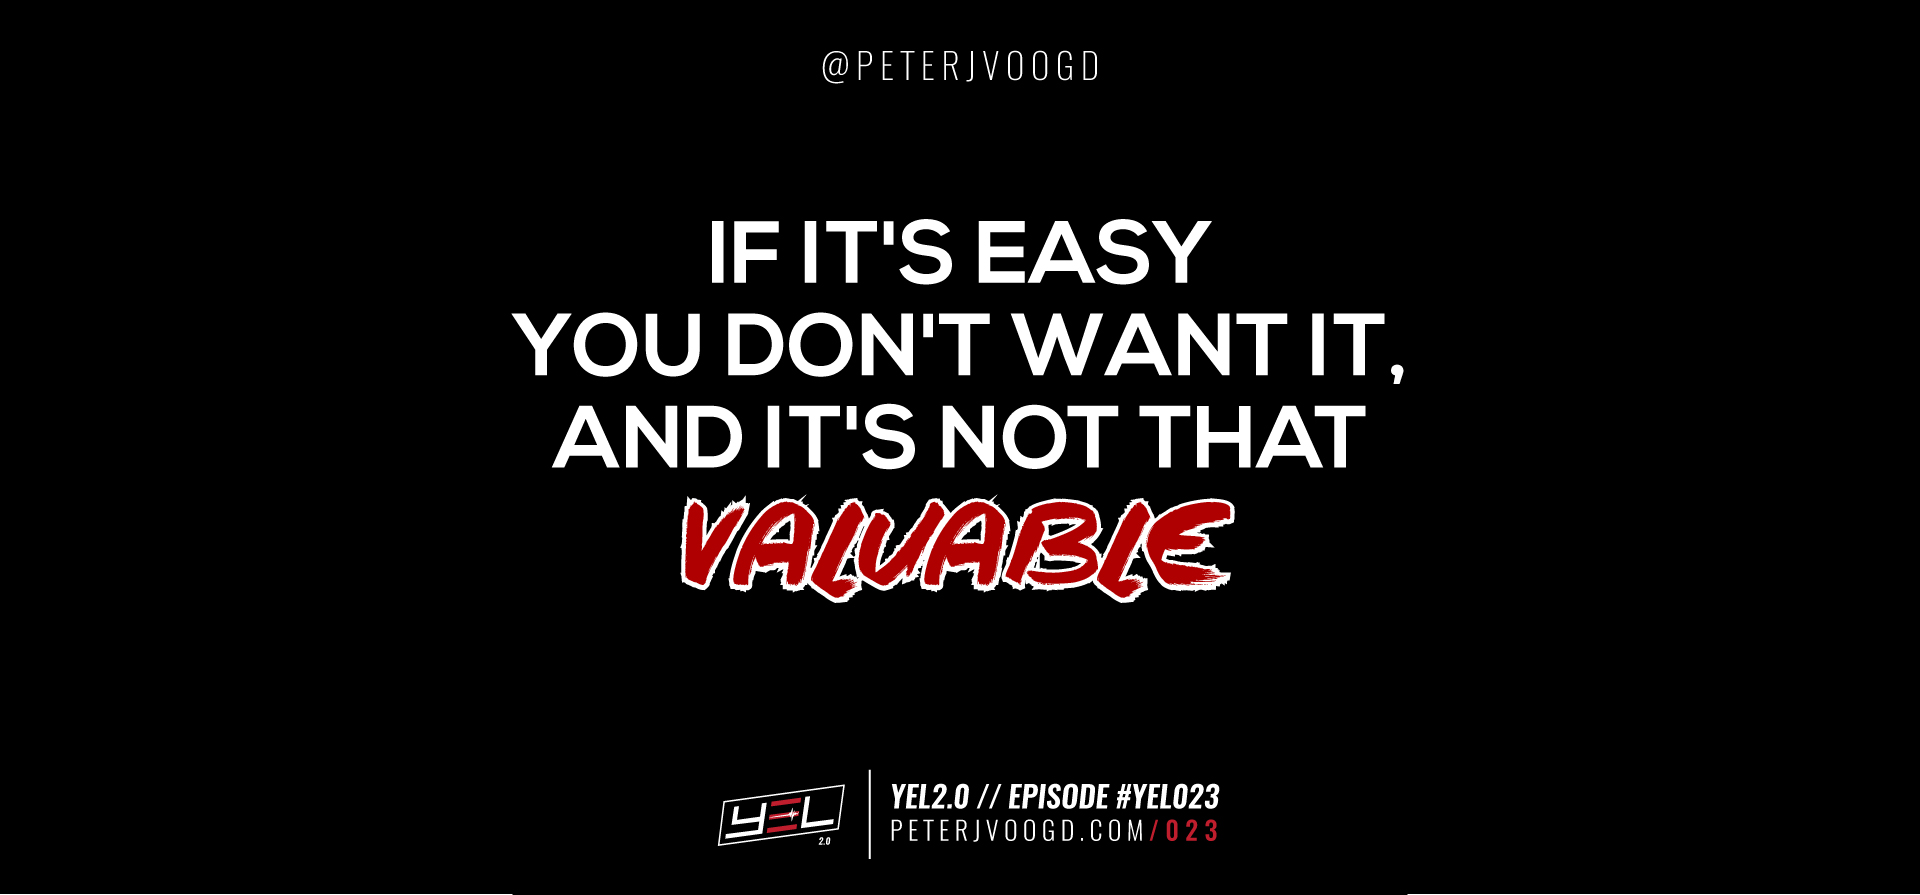 yel2-0-podcast-episode-header-quote-023-3b